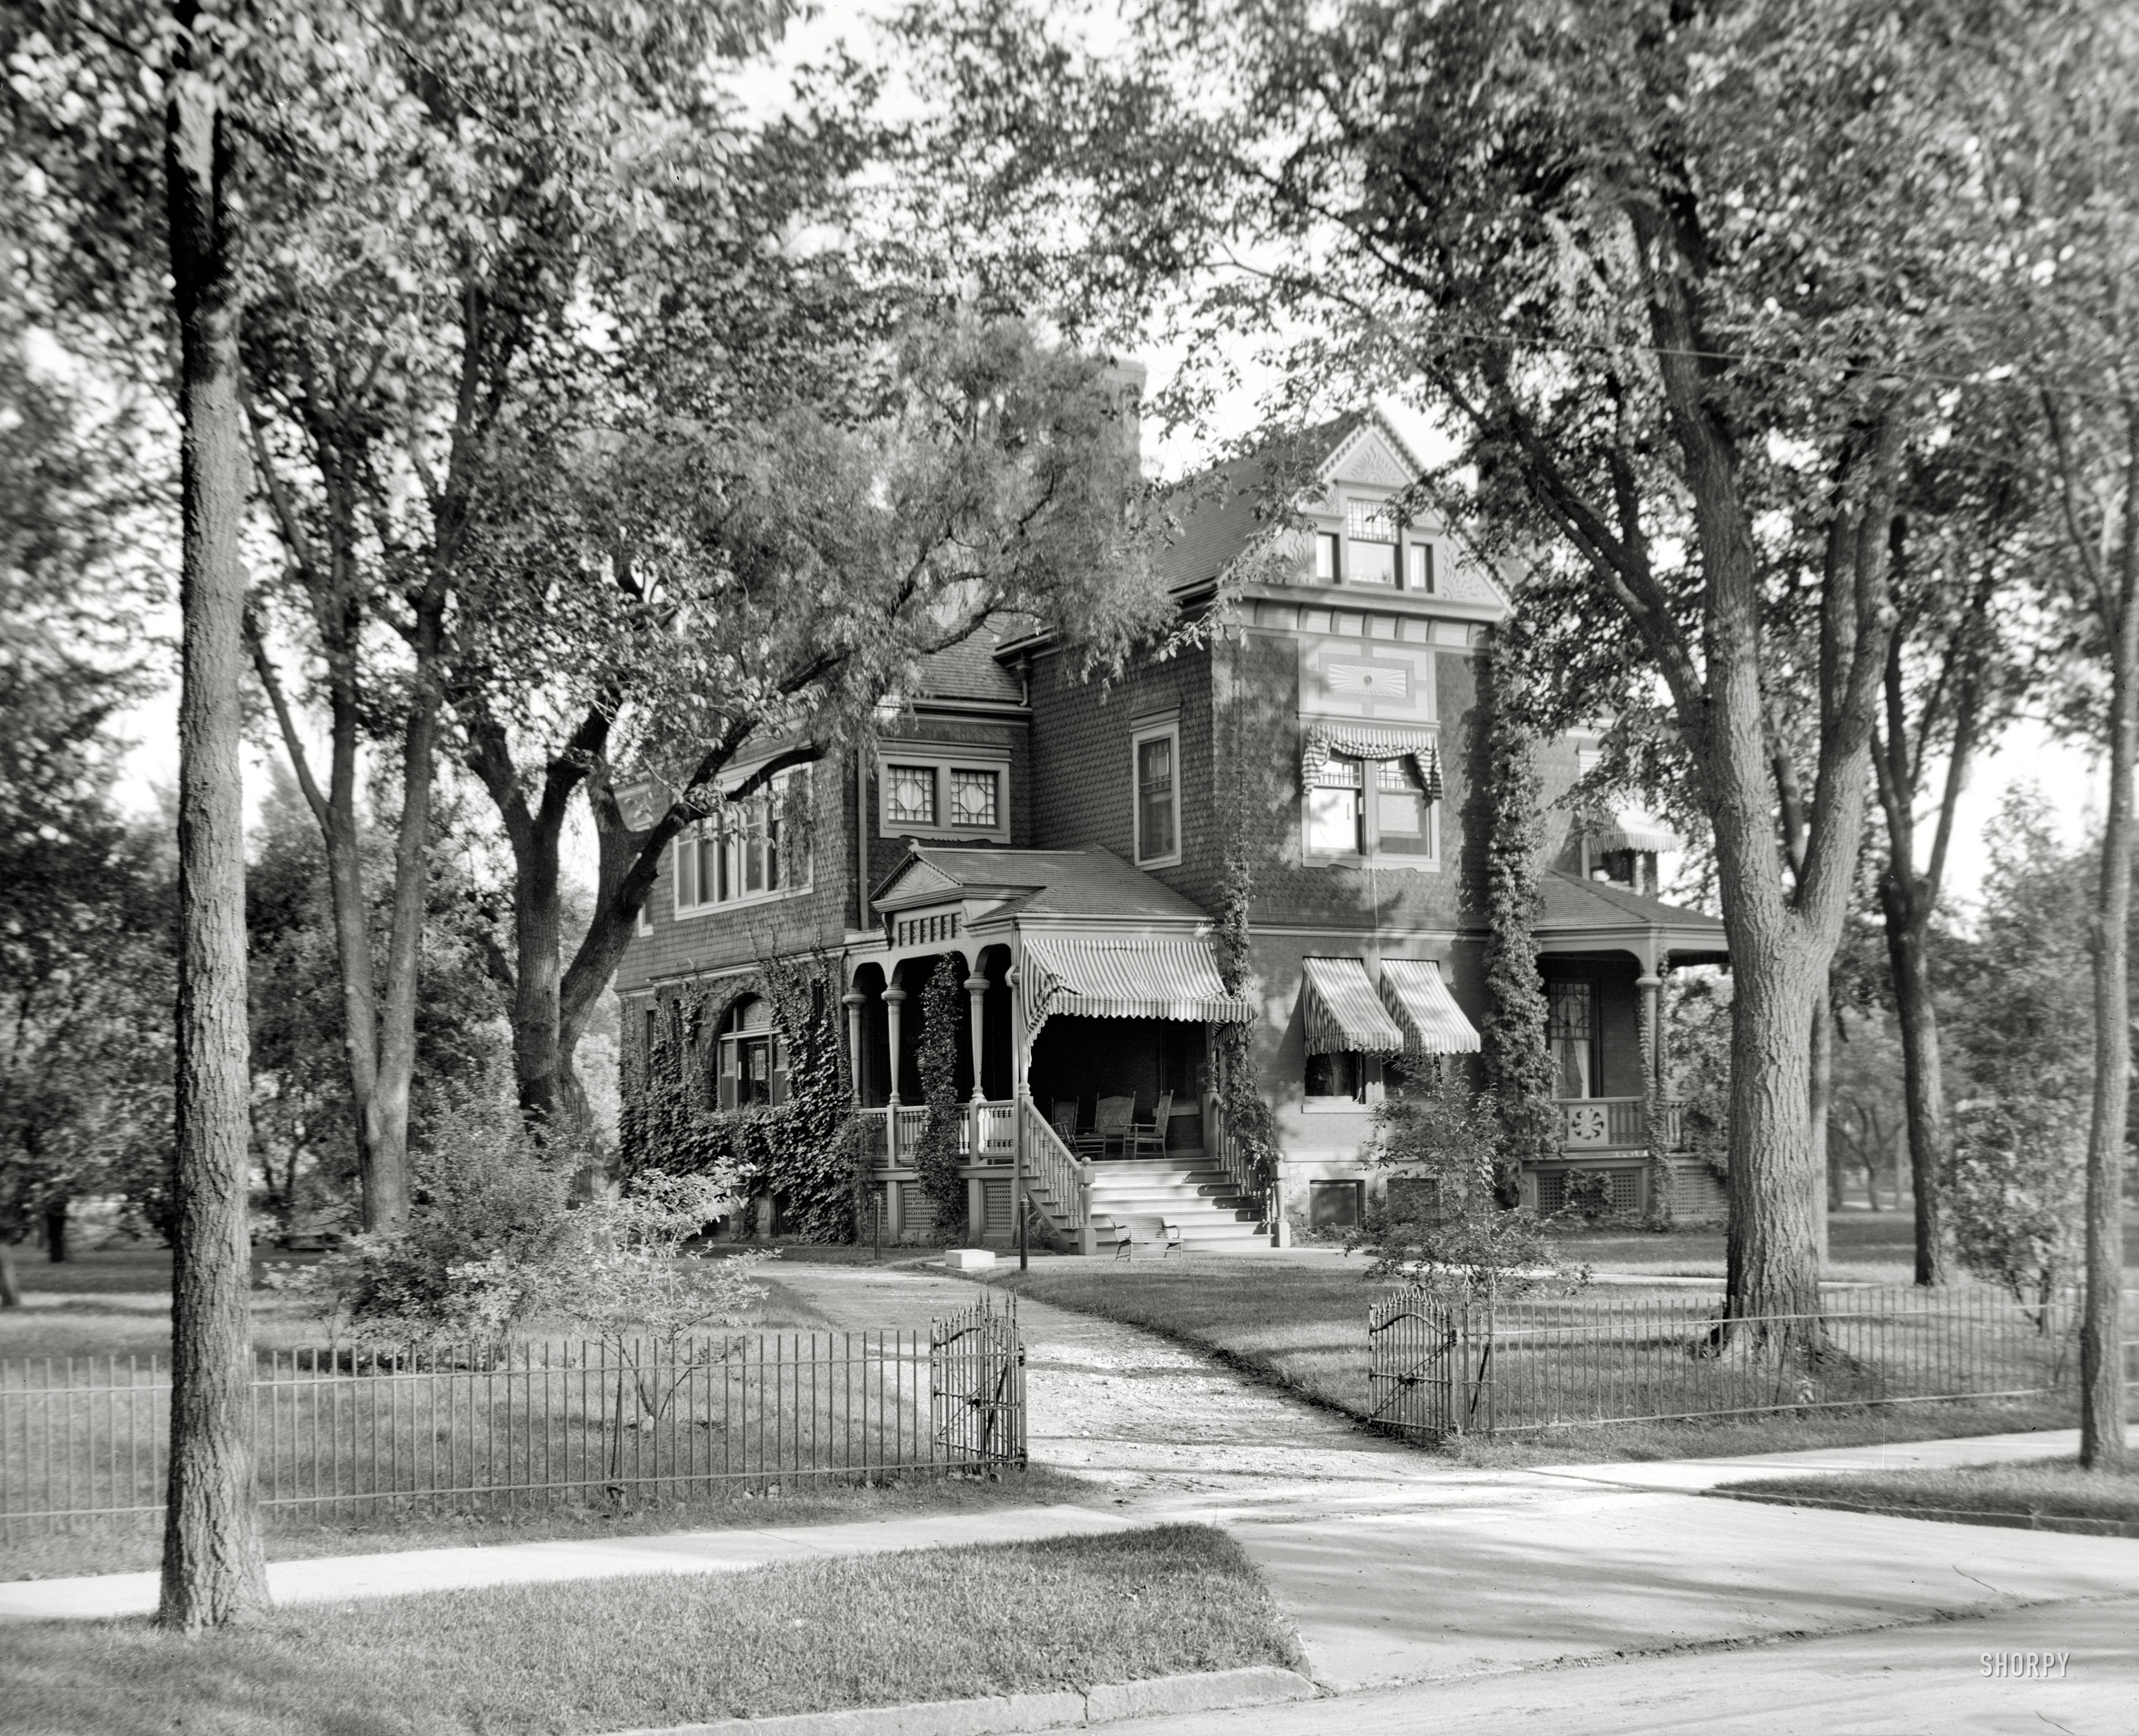 Saginaw, Michigan, circa 1907. "Dr. Henry C. Potter's residence." 8x10 inch dry plate glass negative, Detroit Publishing Company. View full size.